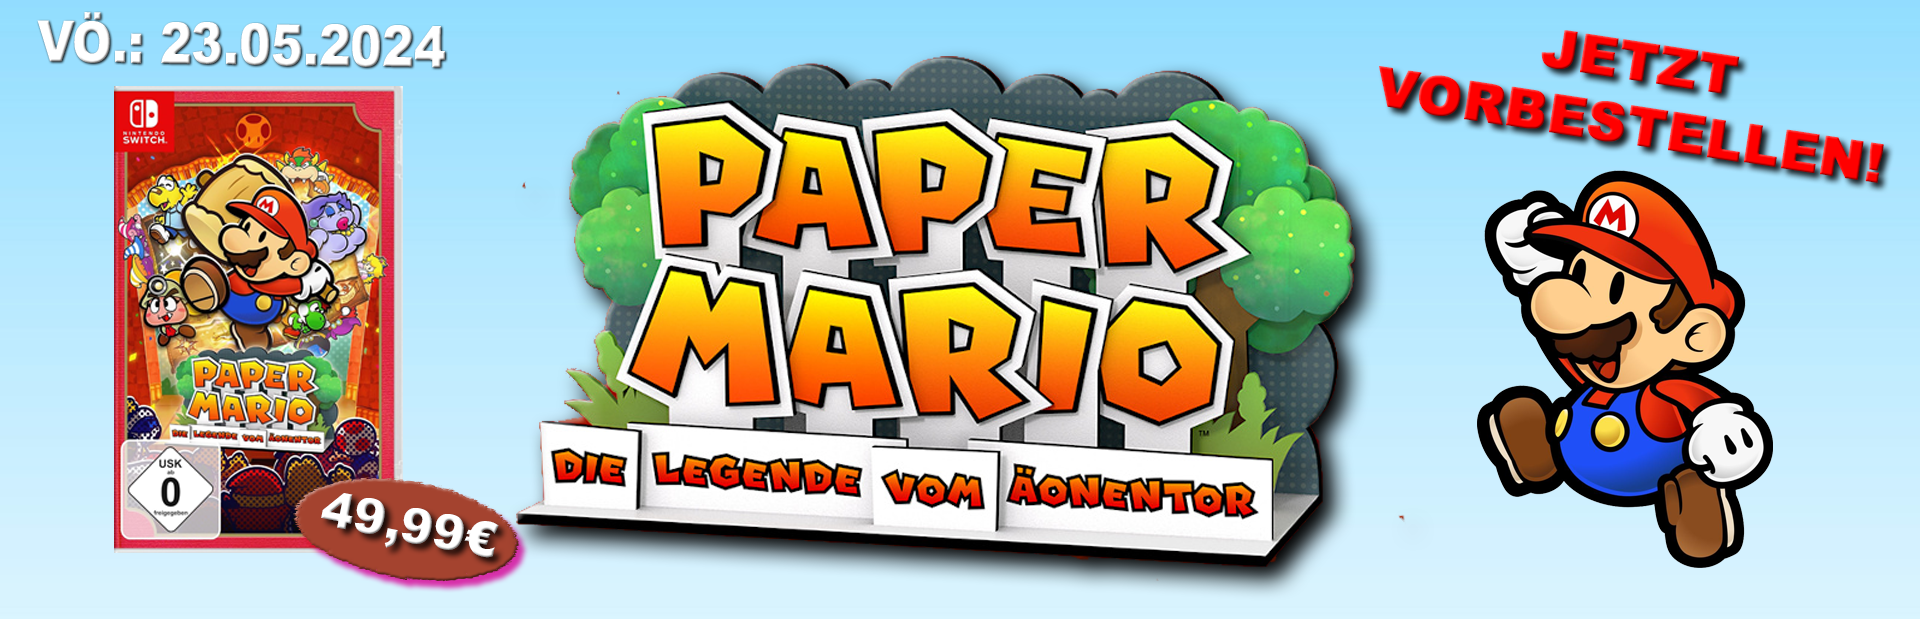 PaperMarion